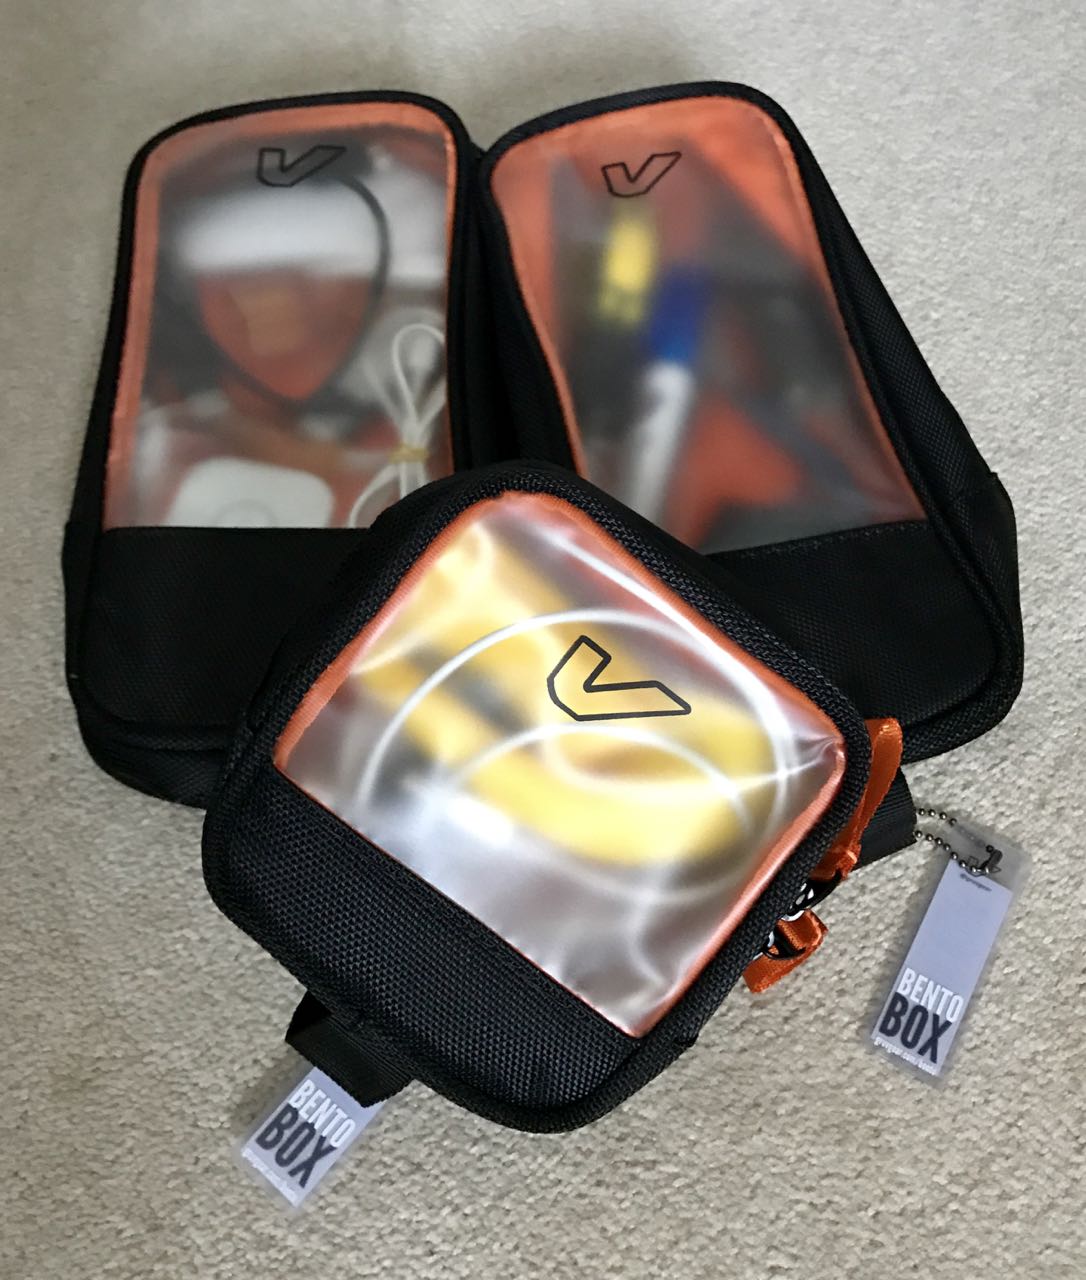 Mix and match any number of Bento Boxes to add a bit more organization to any GRUV GEAR bag. Or you could just buy some for any potential use without the backpack.